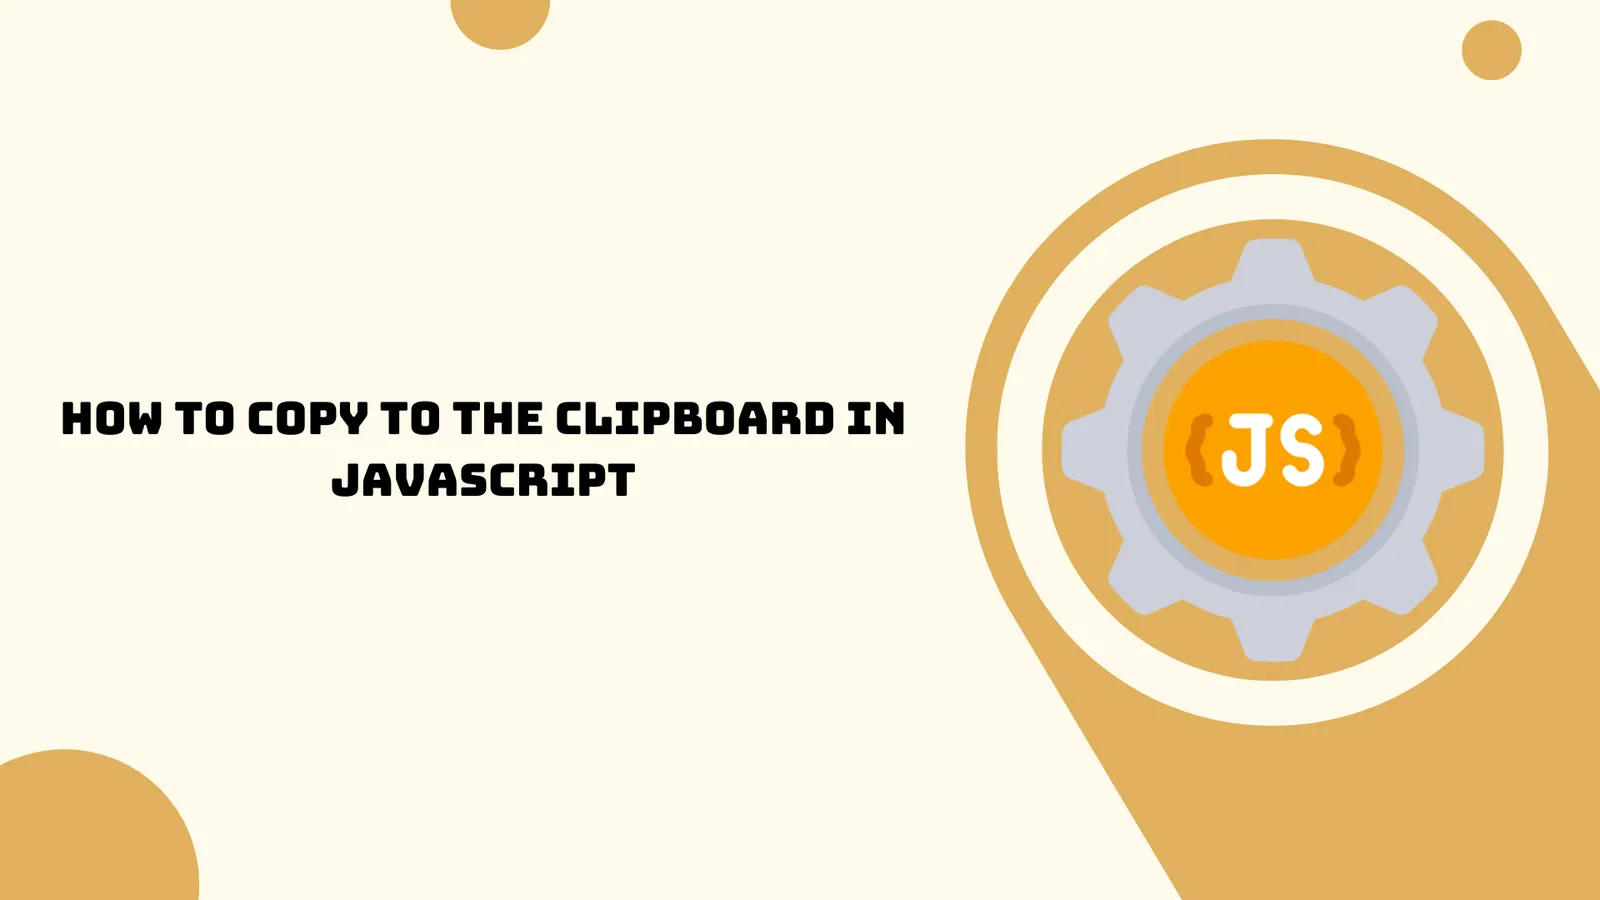 How to copy to the clipboard in JavaScript